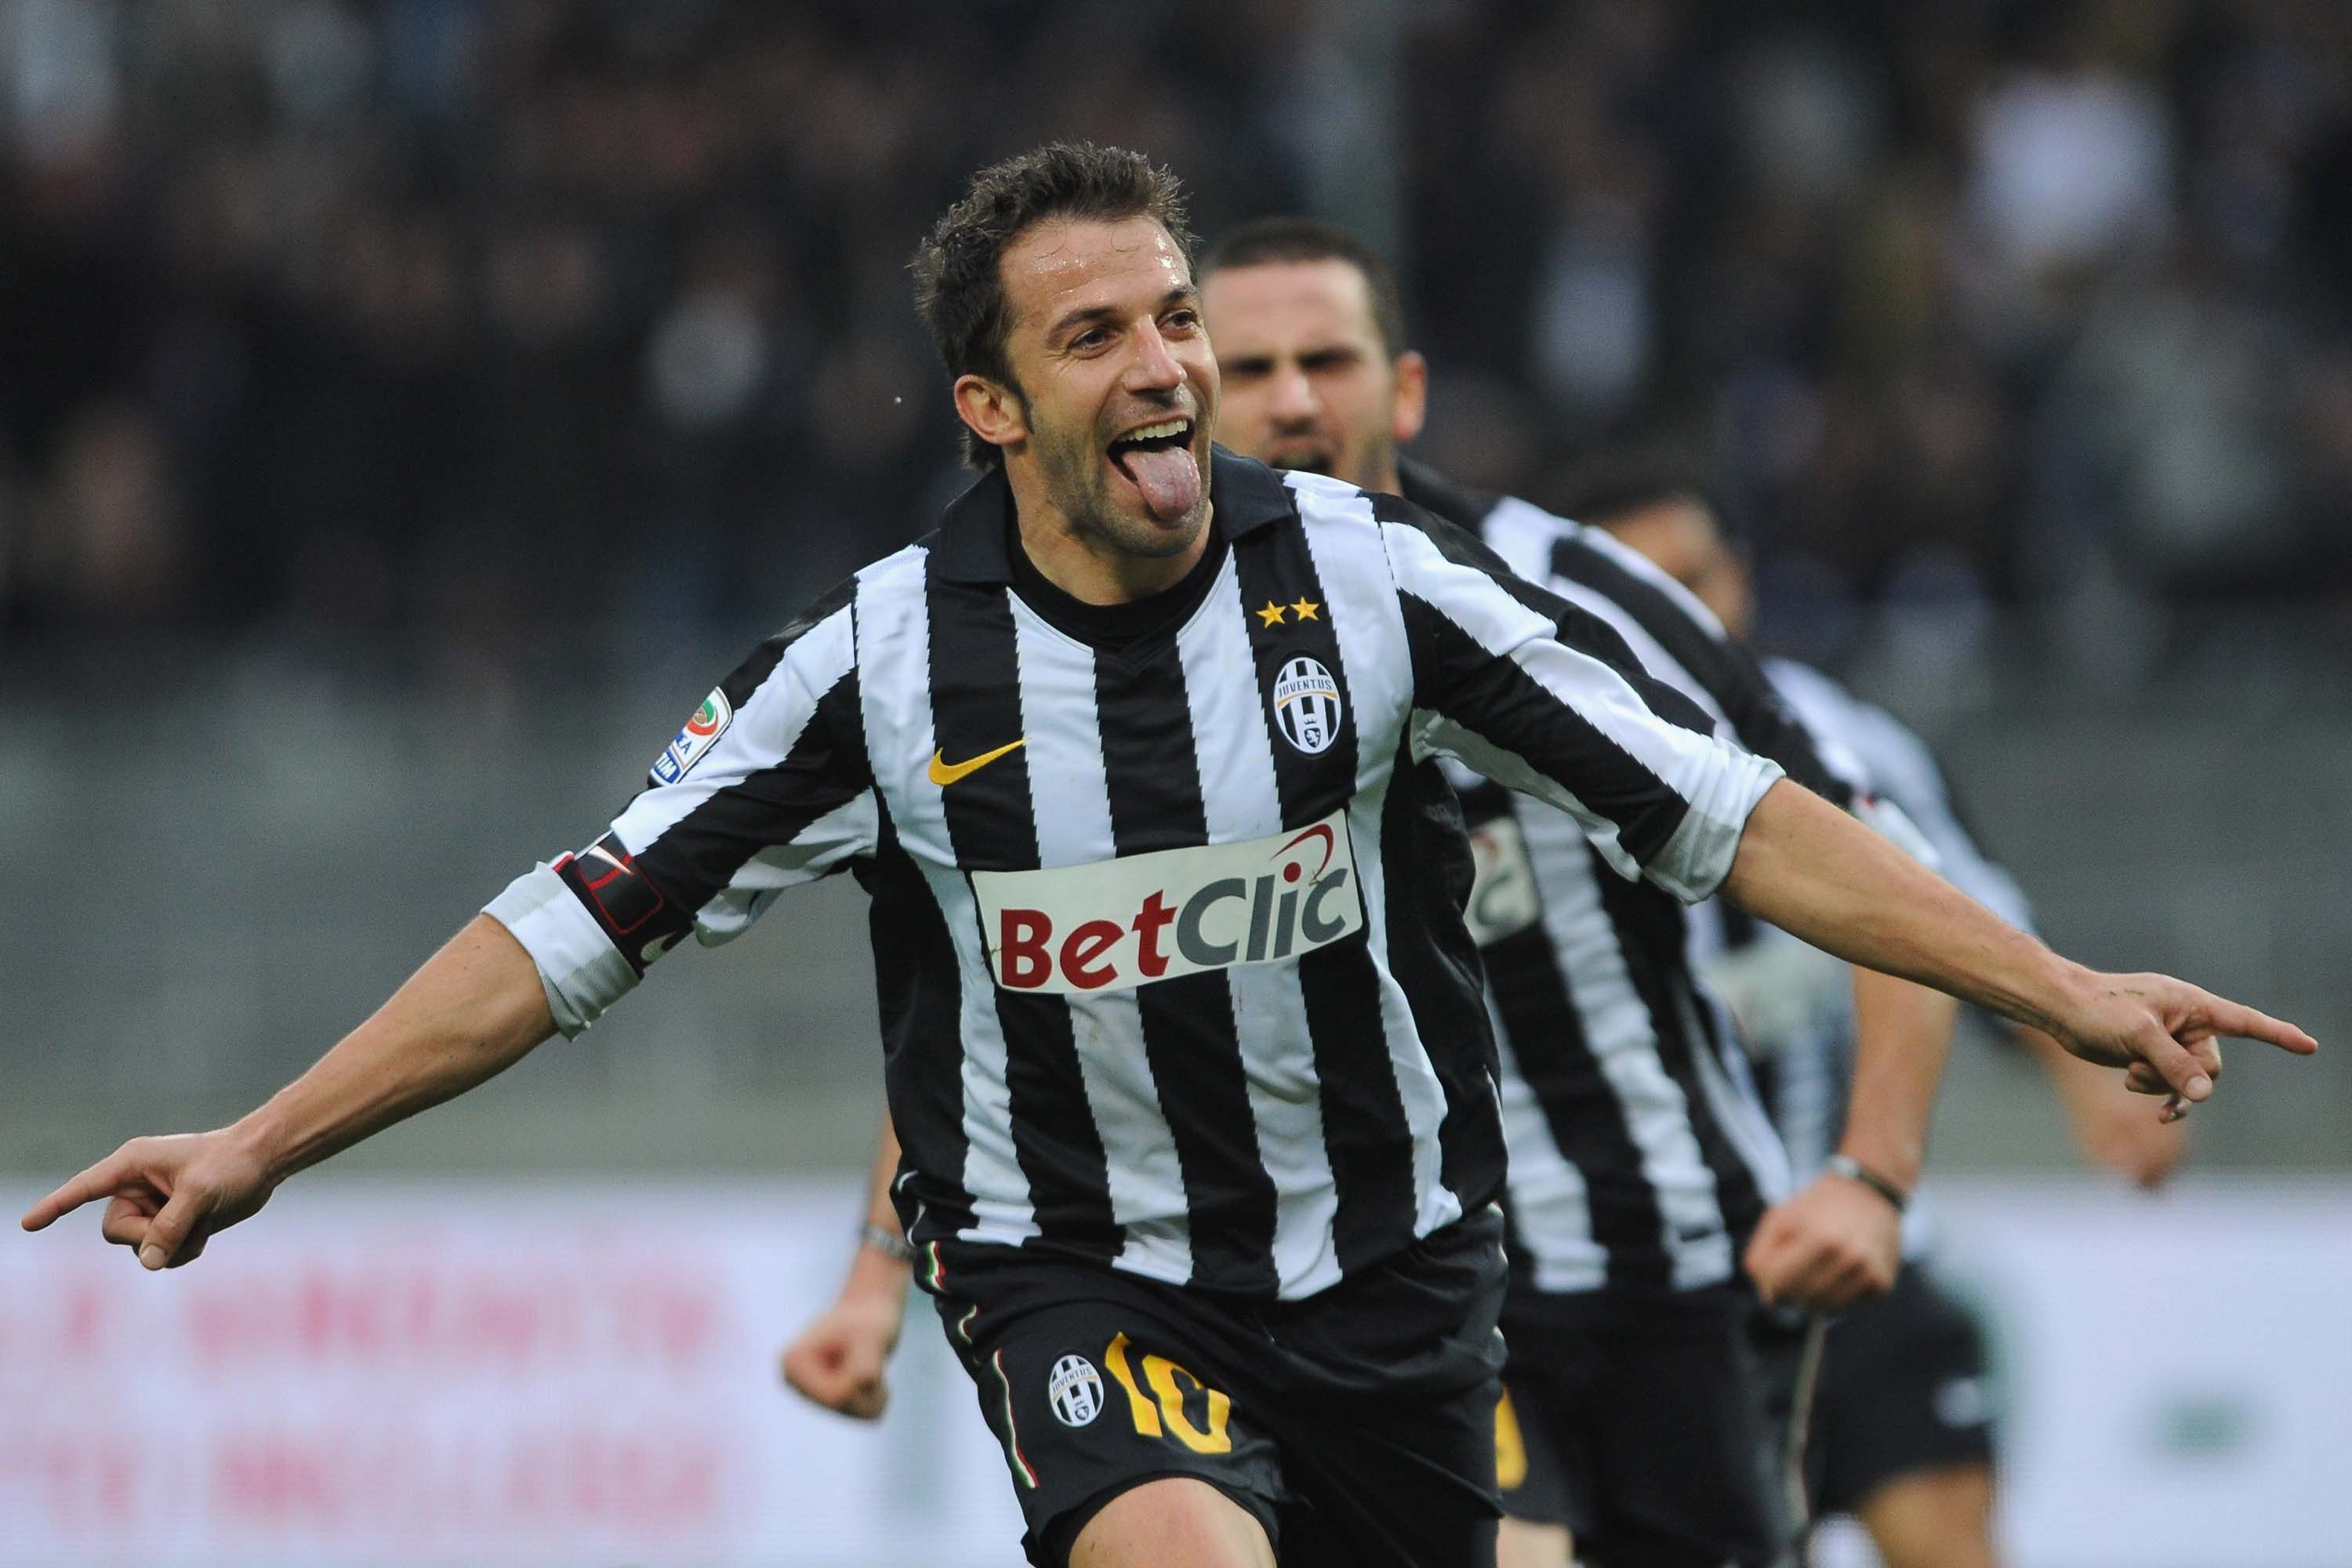 TURIN, ITALY - NOVEMBER 07:  Alessandro Del Piero of Juventus FC celebrates his goal during the Serie A match between Juventus FC and AC Cesena at Olimpico Stadium on November 7, 2010 in Turin, Italy.  (Photo by Valerio Pennicino/Getty Images)